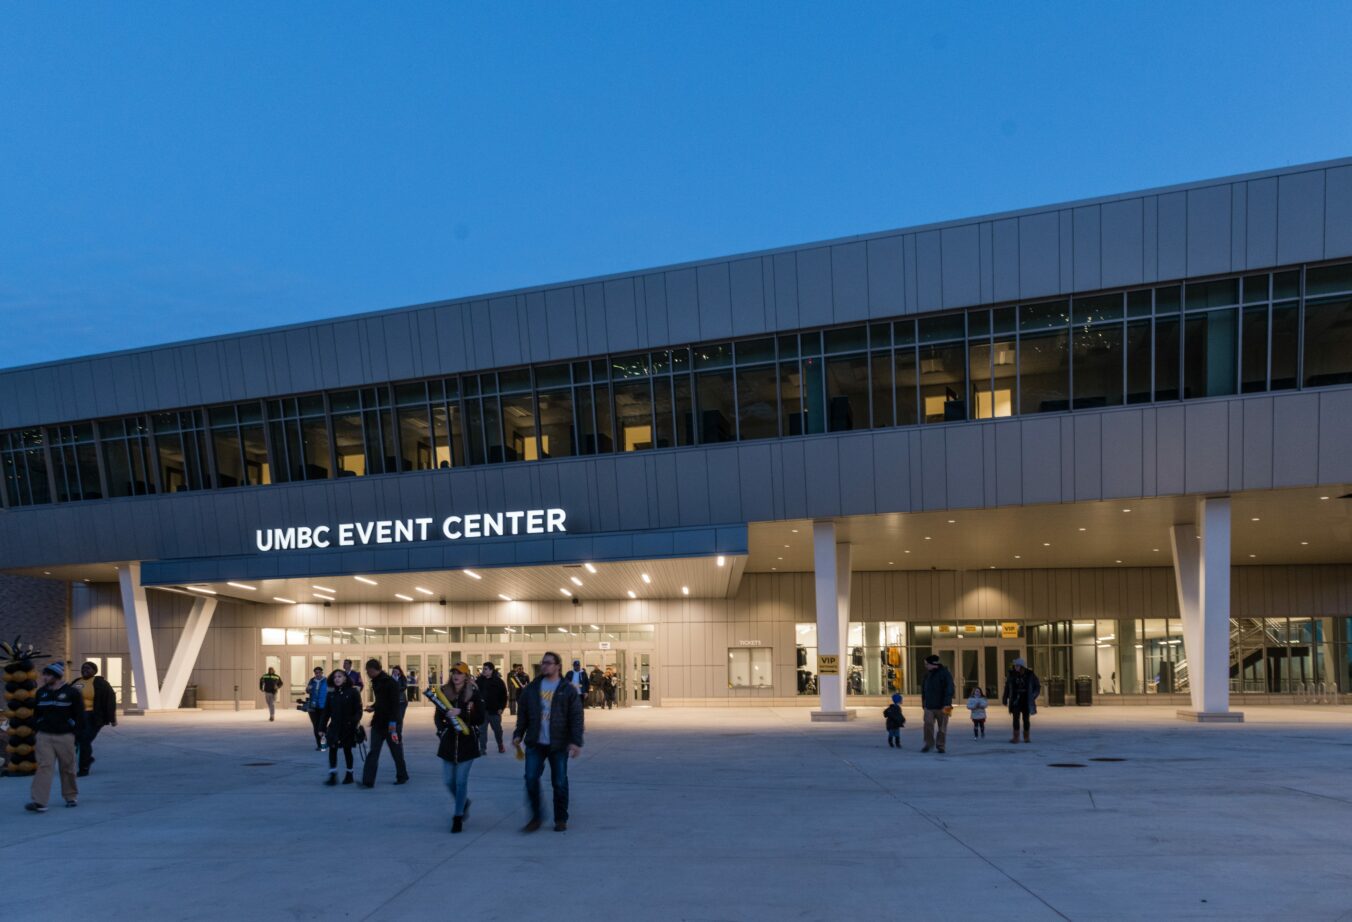 Crowds entering the main entrance of the UMBC event center